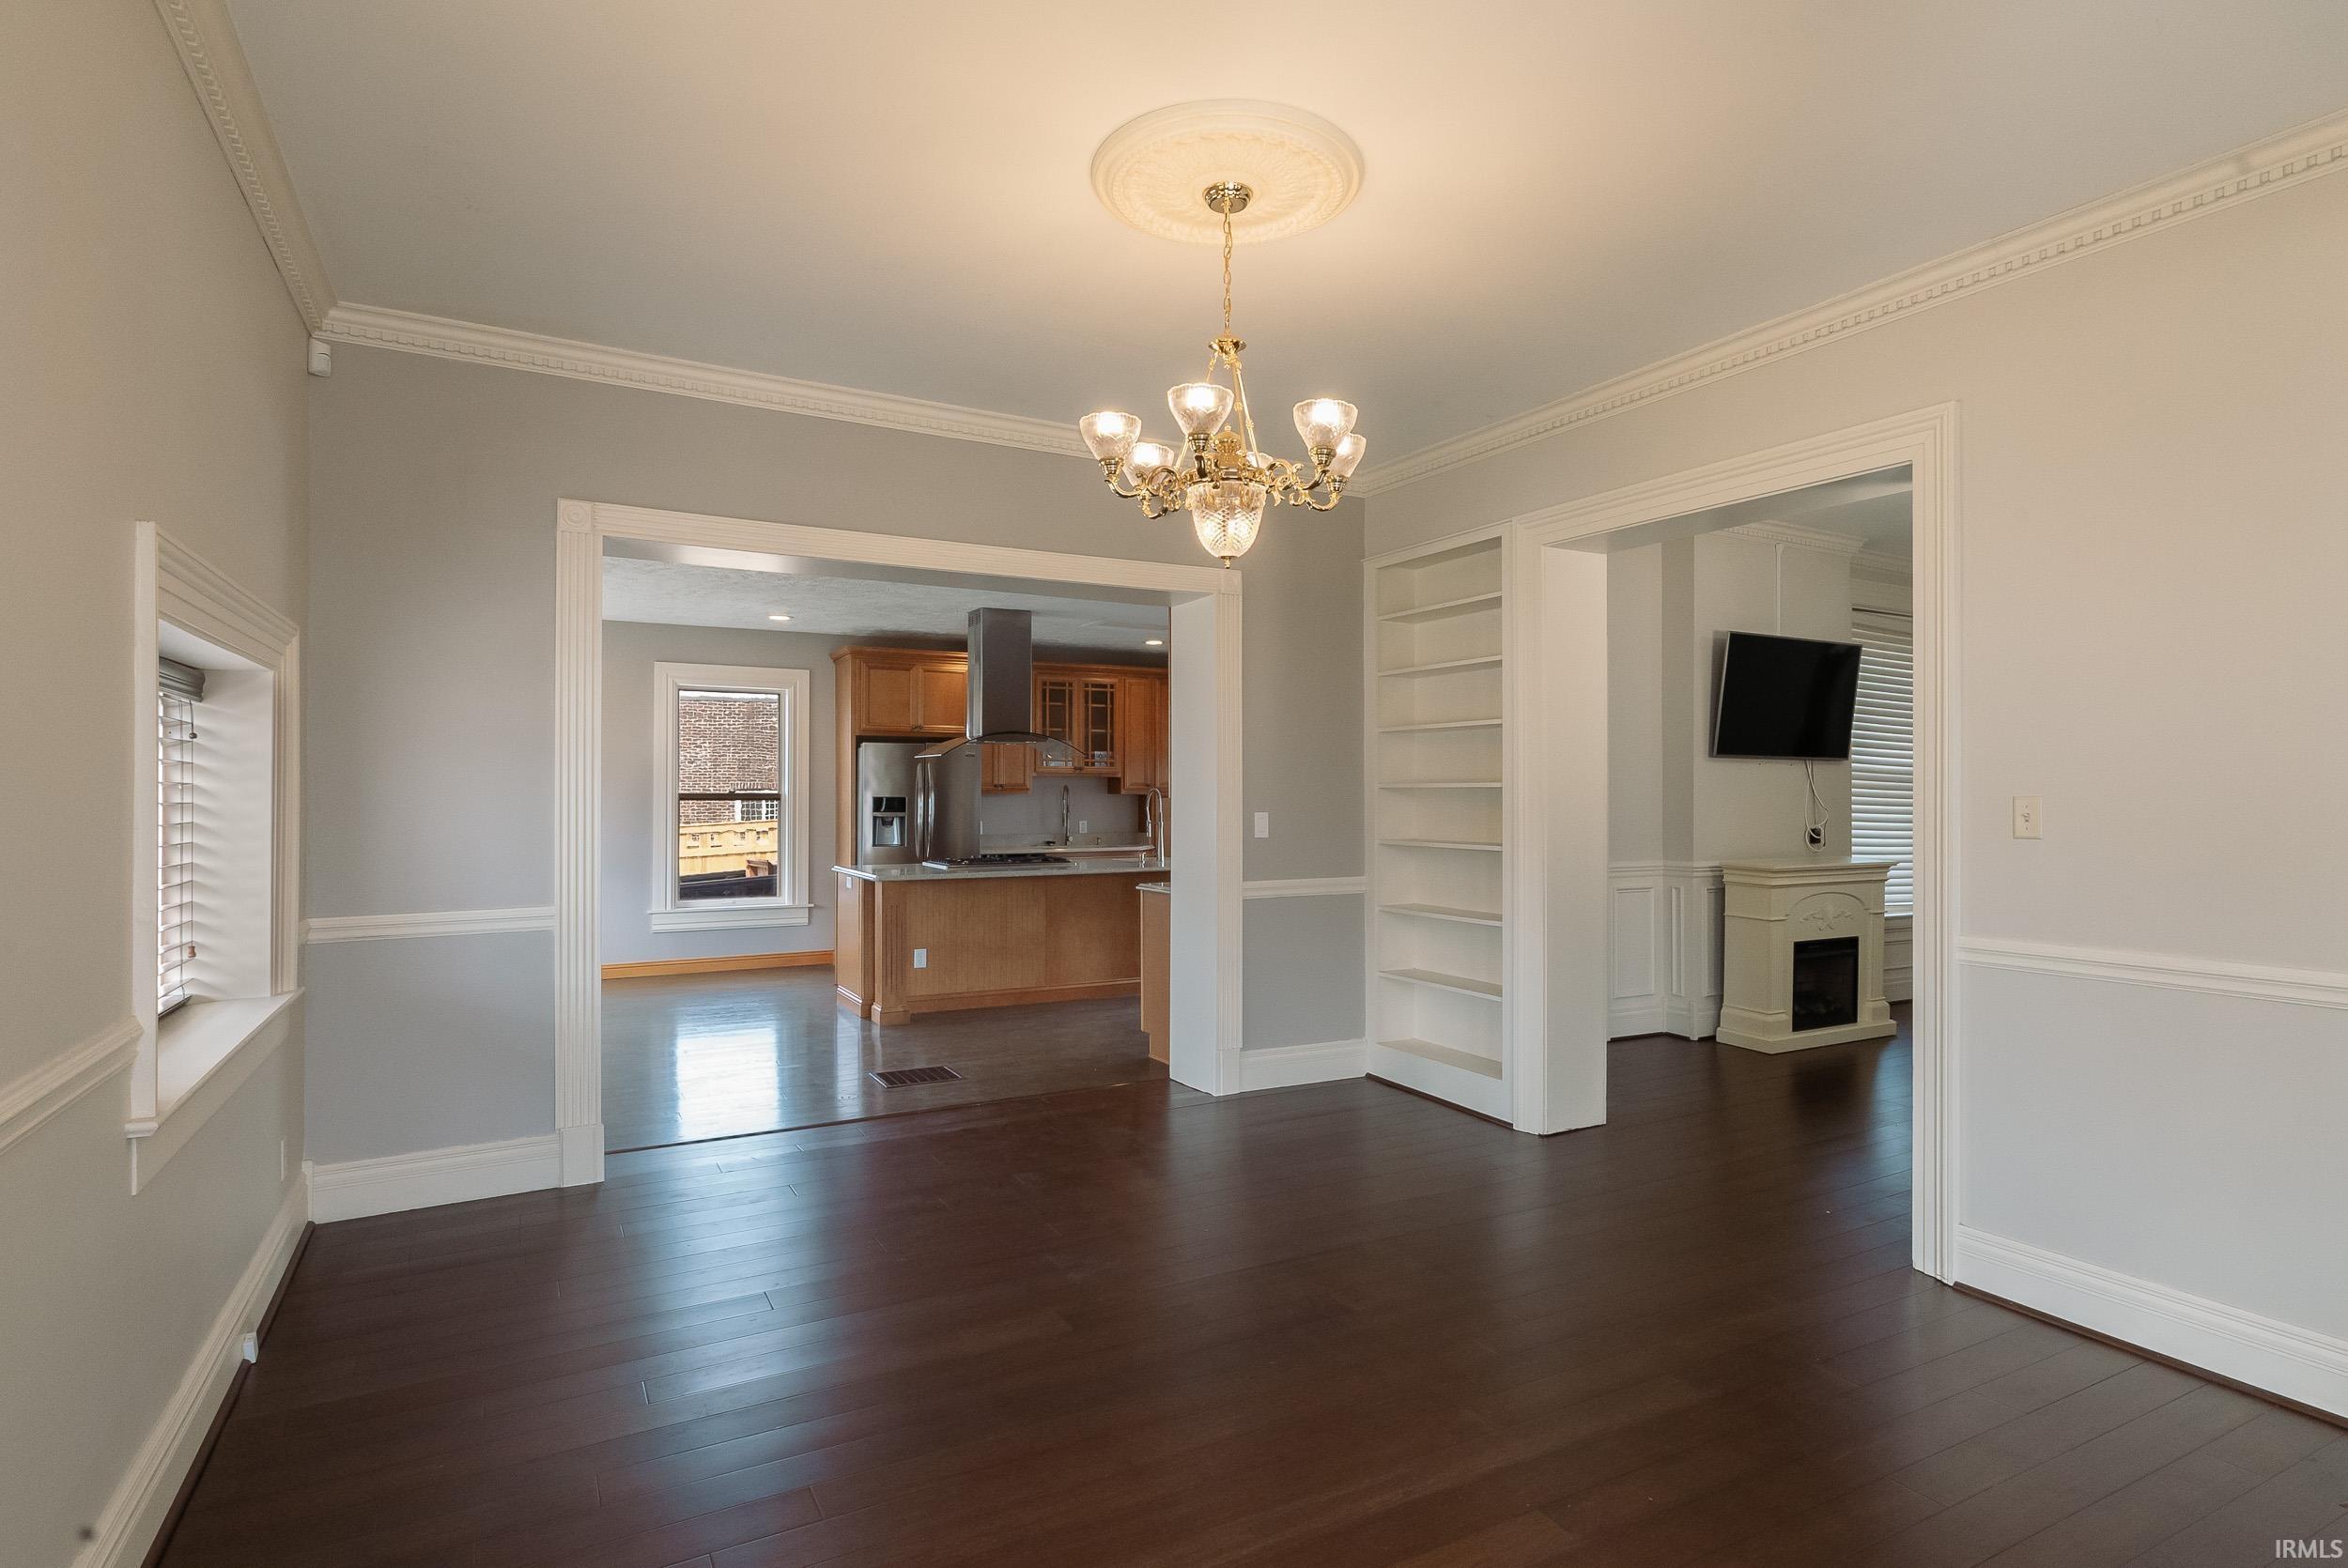 This downtown historic home's unique features include: crown moulding and wood trim.